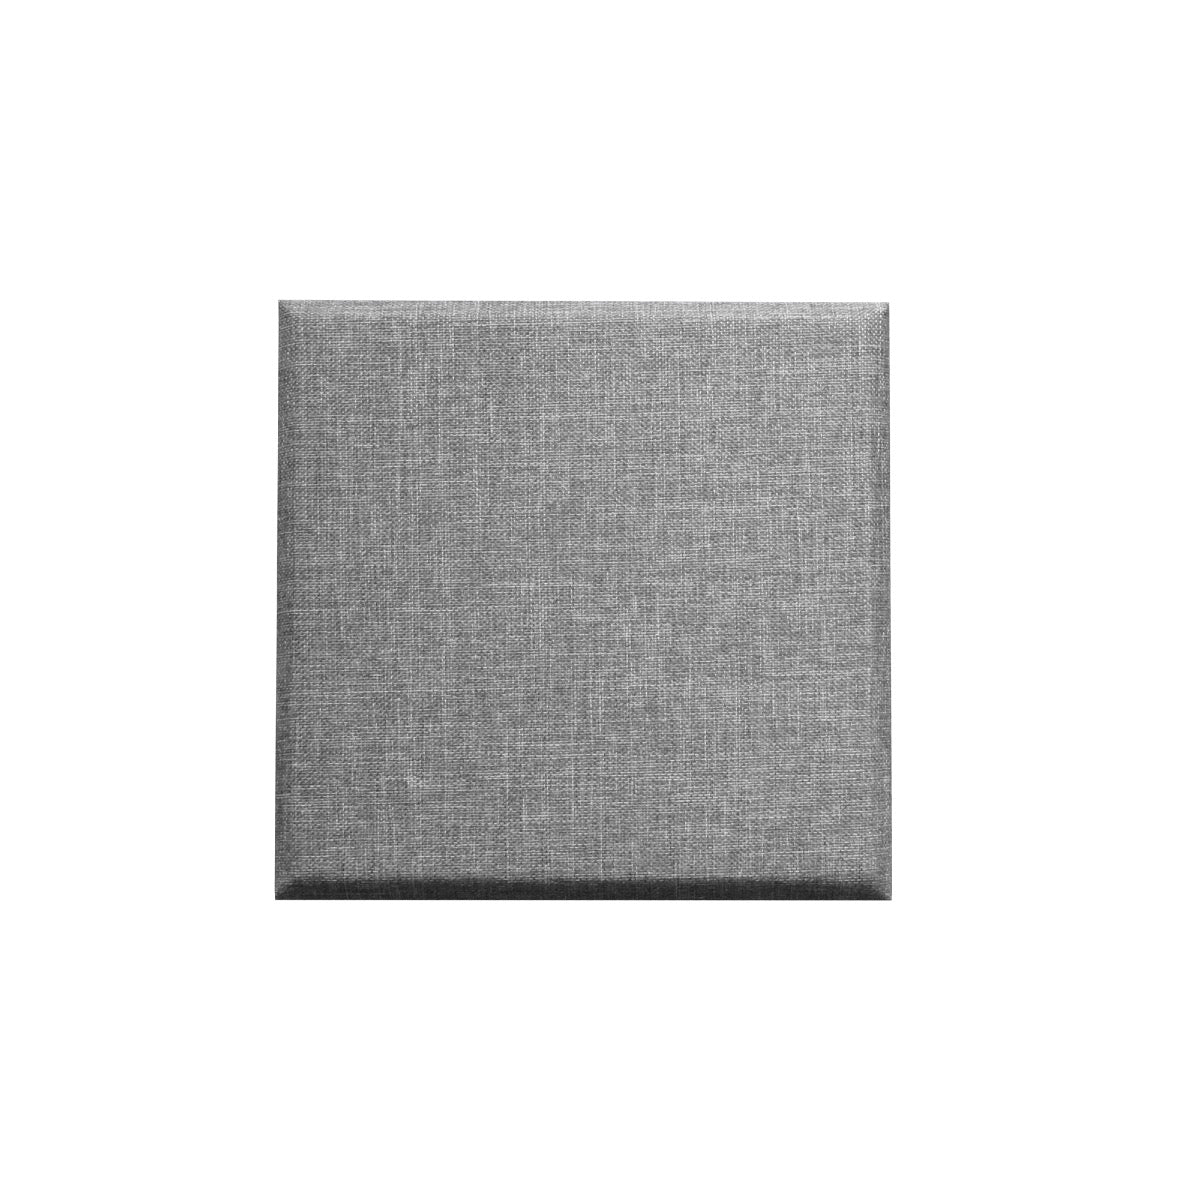 Primacoustic 2" Control Cube Panel - Beveled Edge - Gray - 12 Pack